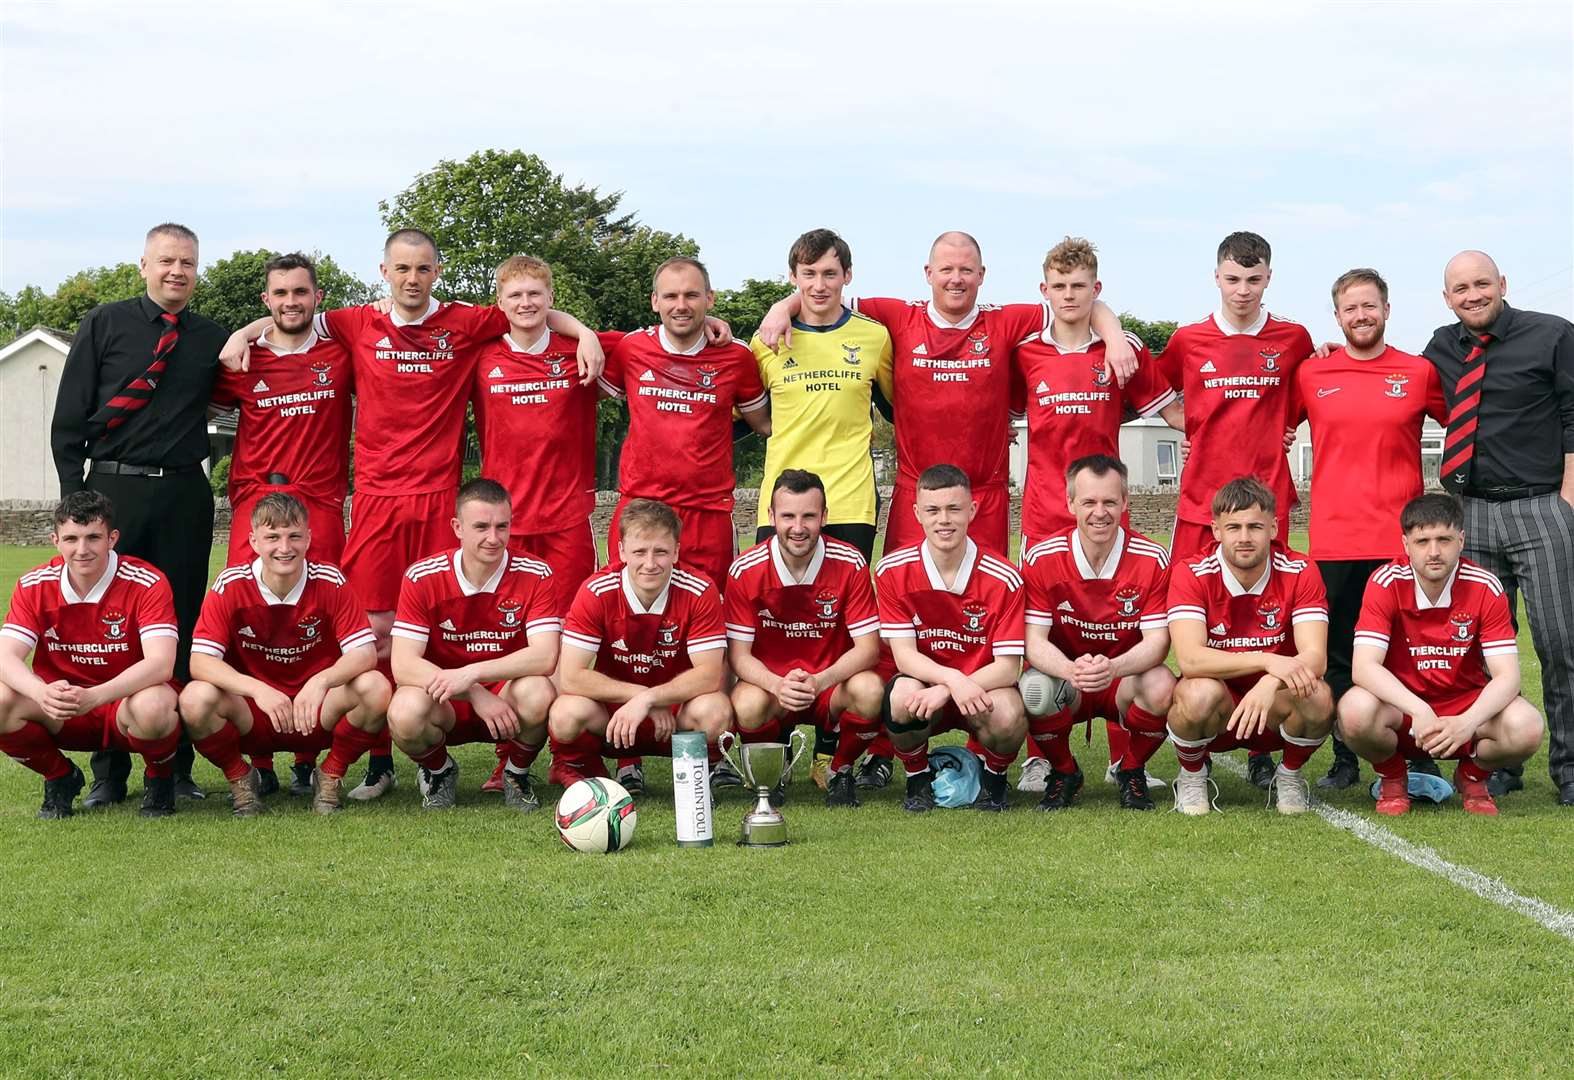 We should have had cup final put to bed before we did, says Wick Groats manager